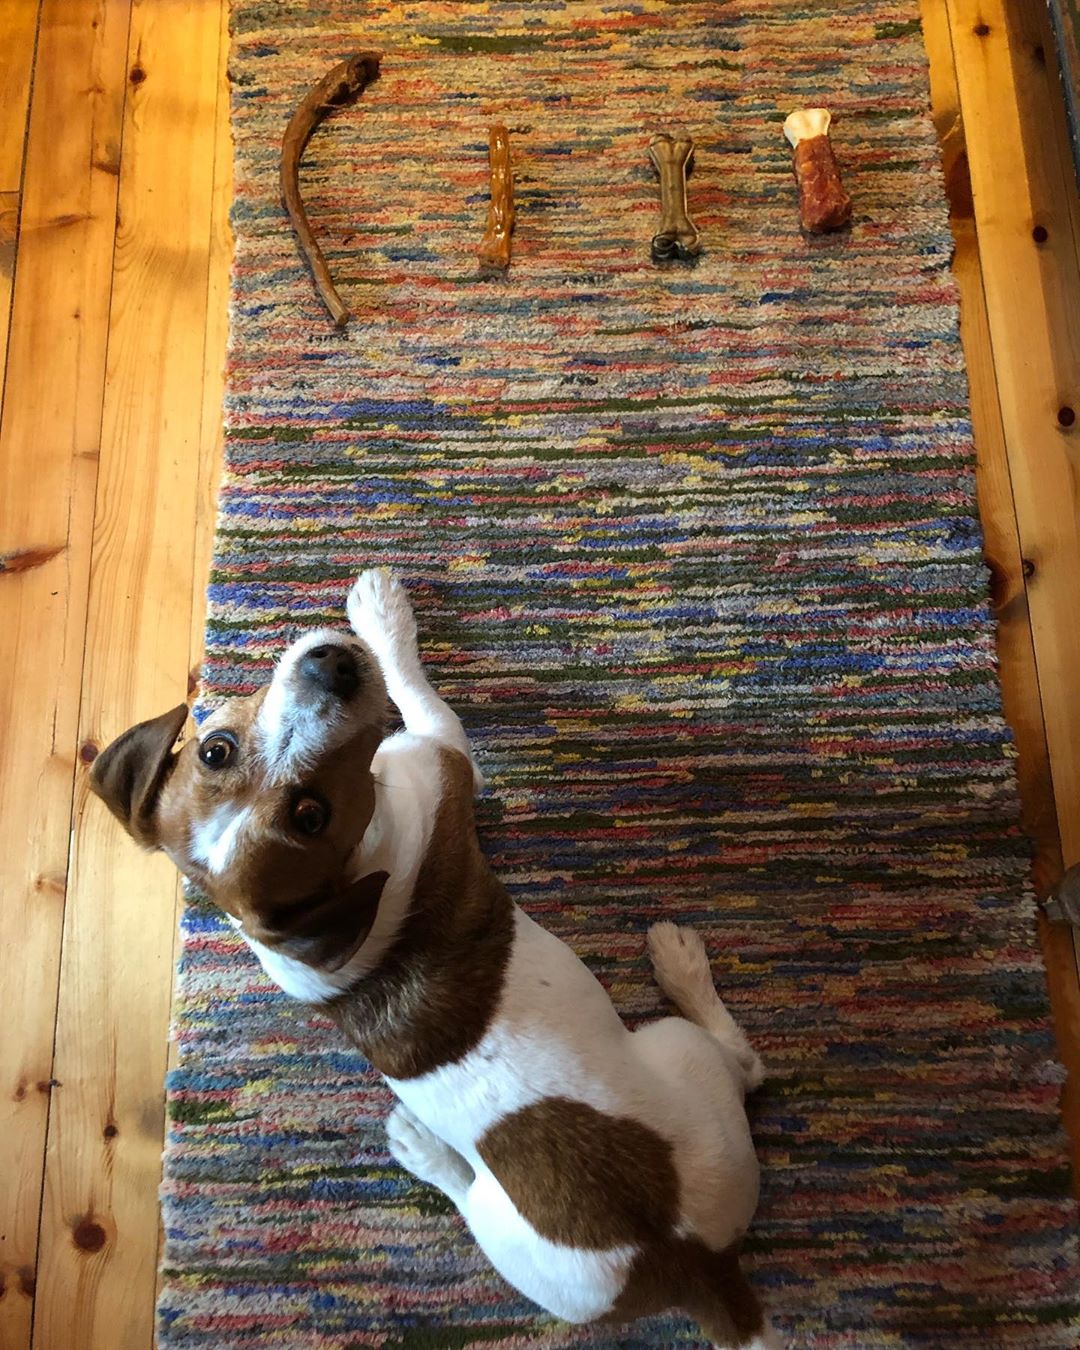 A Jack Russell sitting on the floor in front of its bone treats